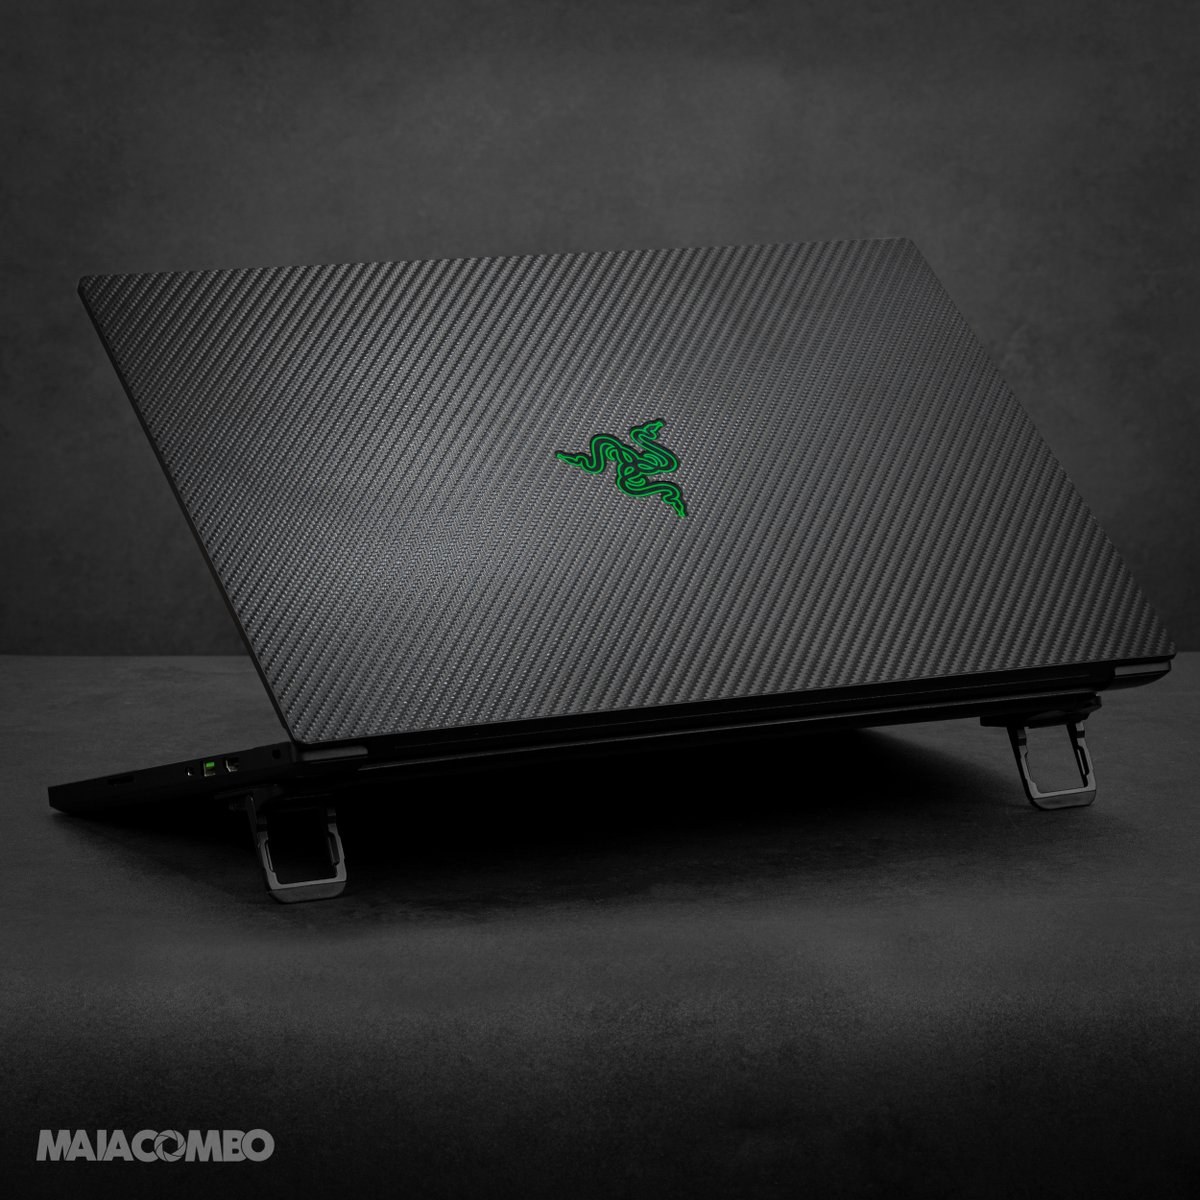 Adding decals to your laptop is a great way to prevent scratches 👍
👉 Dm me if you love it

---
#maiacombo #maiacomboskin #Razer #laptops #laptoprazer #razerskin #laptopskin #protectlaptop #laptopskinwraps